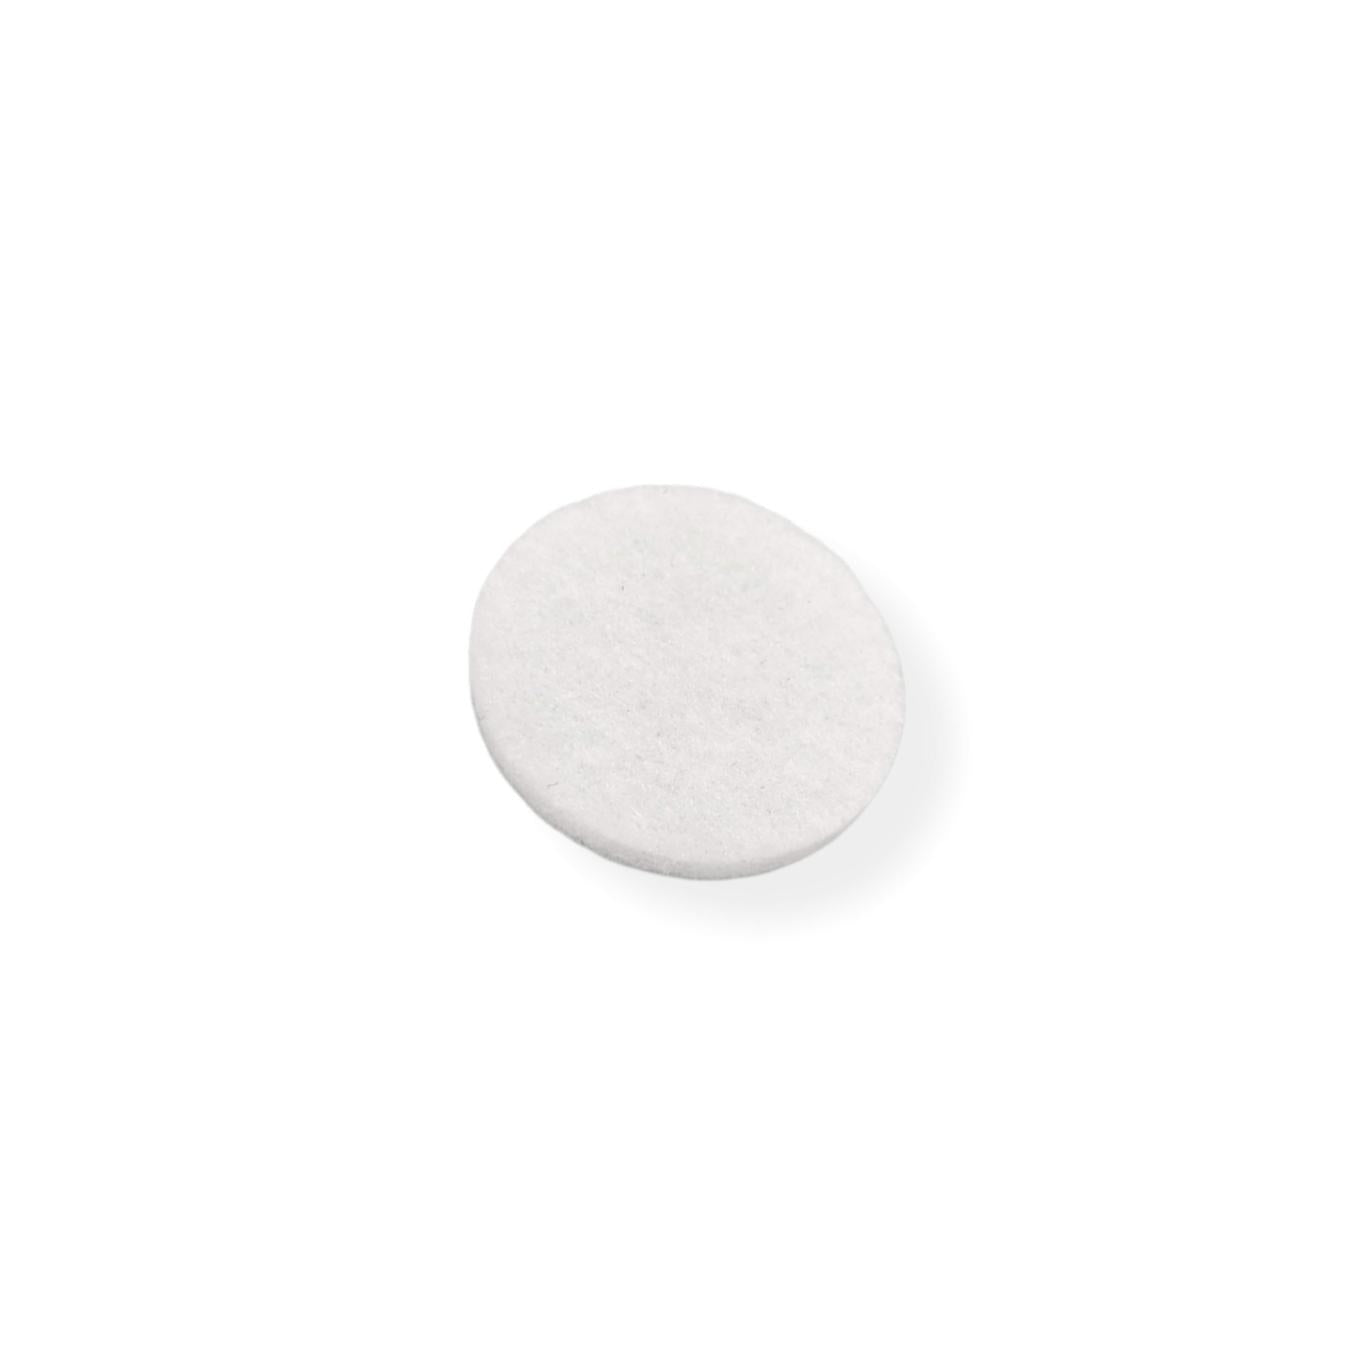 Felt Pads - White Self Adhesive Stick on Felt - Round 20mm Diameter - Made in Germany - Keay Vital Parts